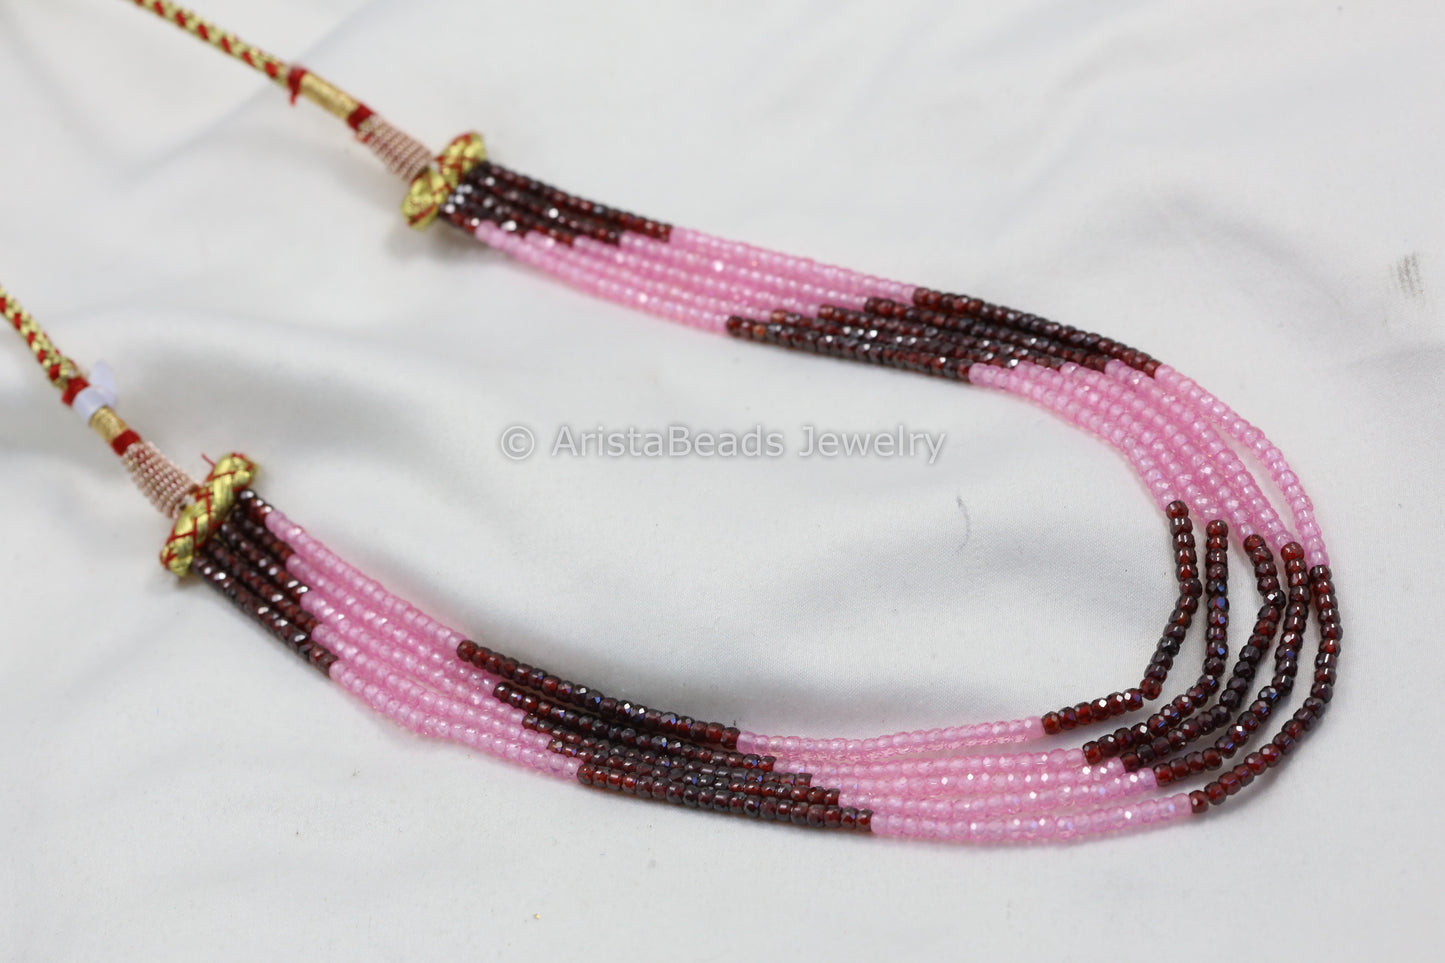 5 Strand Hydro Bead Necklace - Pink Maroon